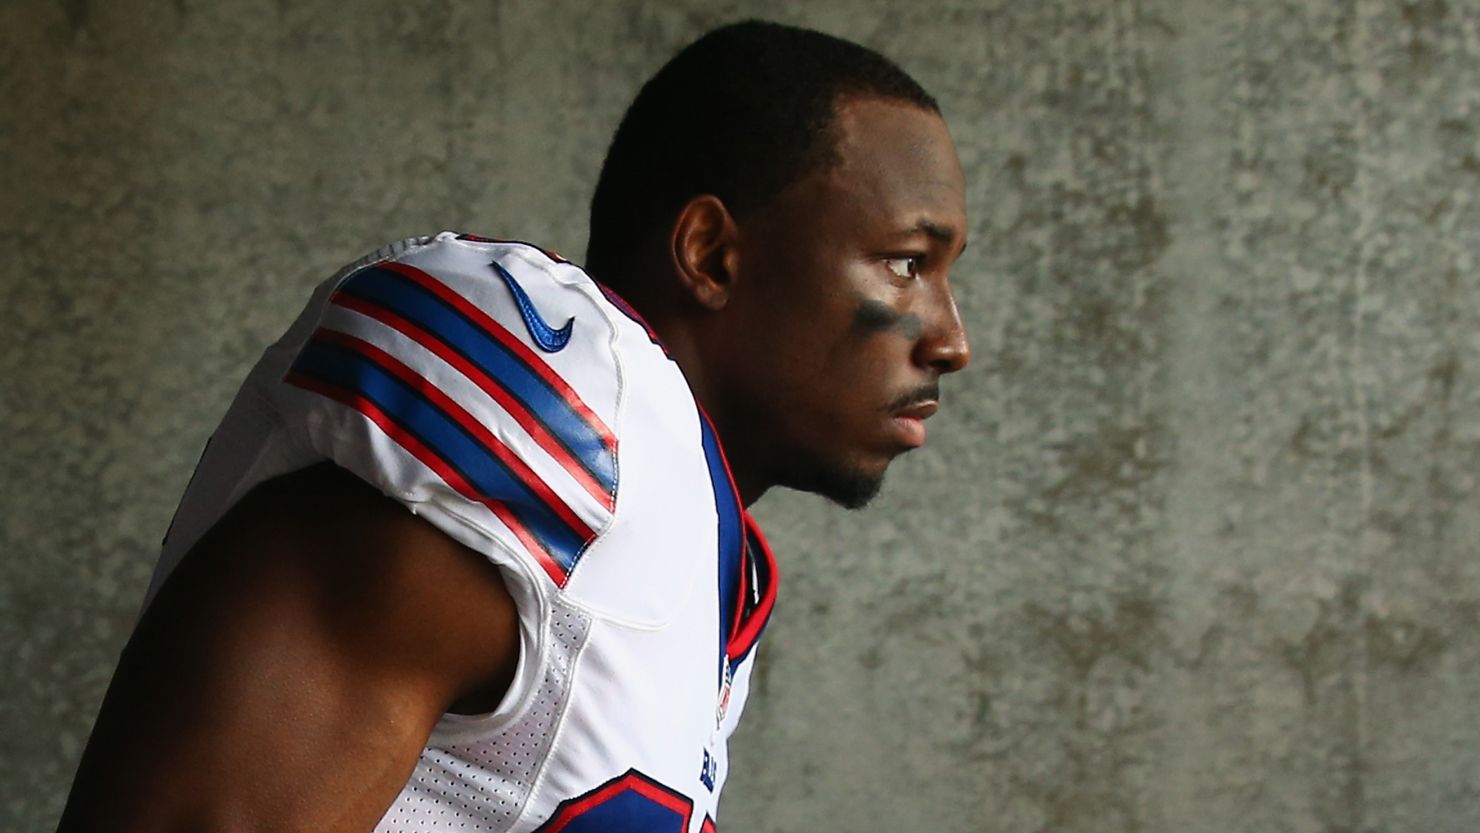 Buffalo Bills running back LeSean McCoy is expected to be charged in connection with an alleged assault against two off-duty police officers at a Philadelphia nightclub, according to an NFL official familiar with the investigation.